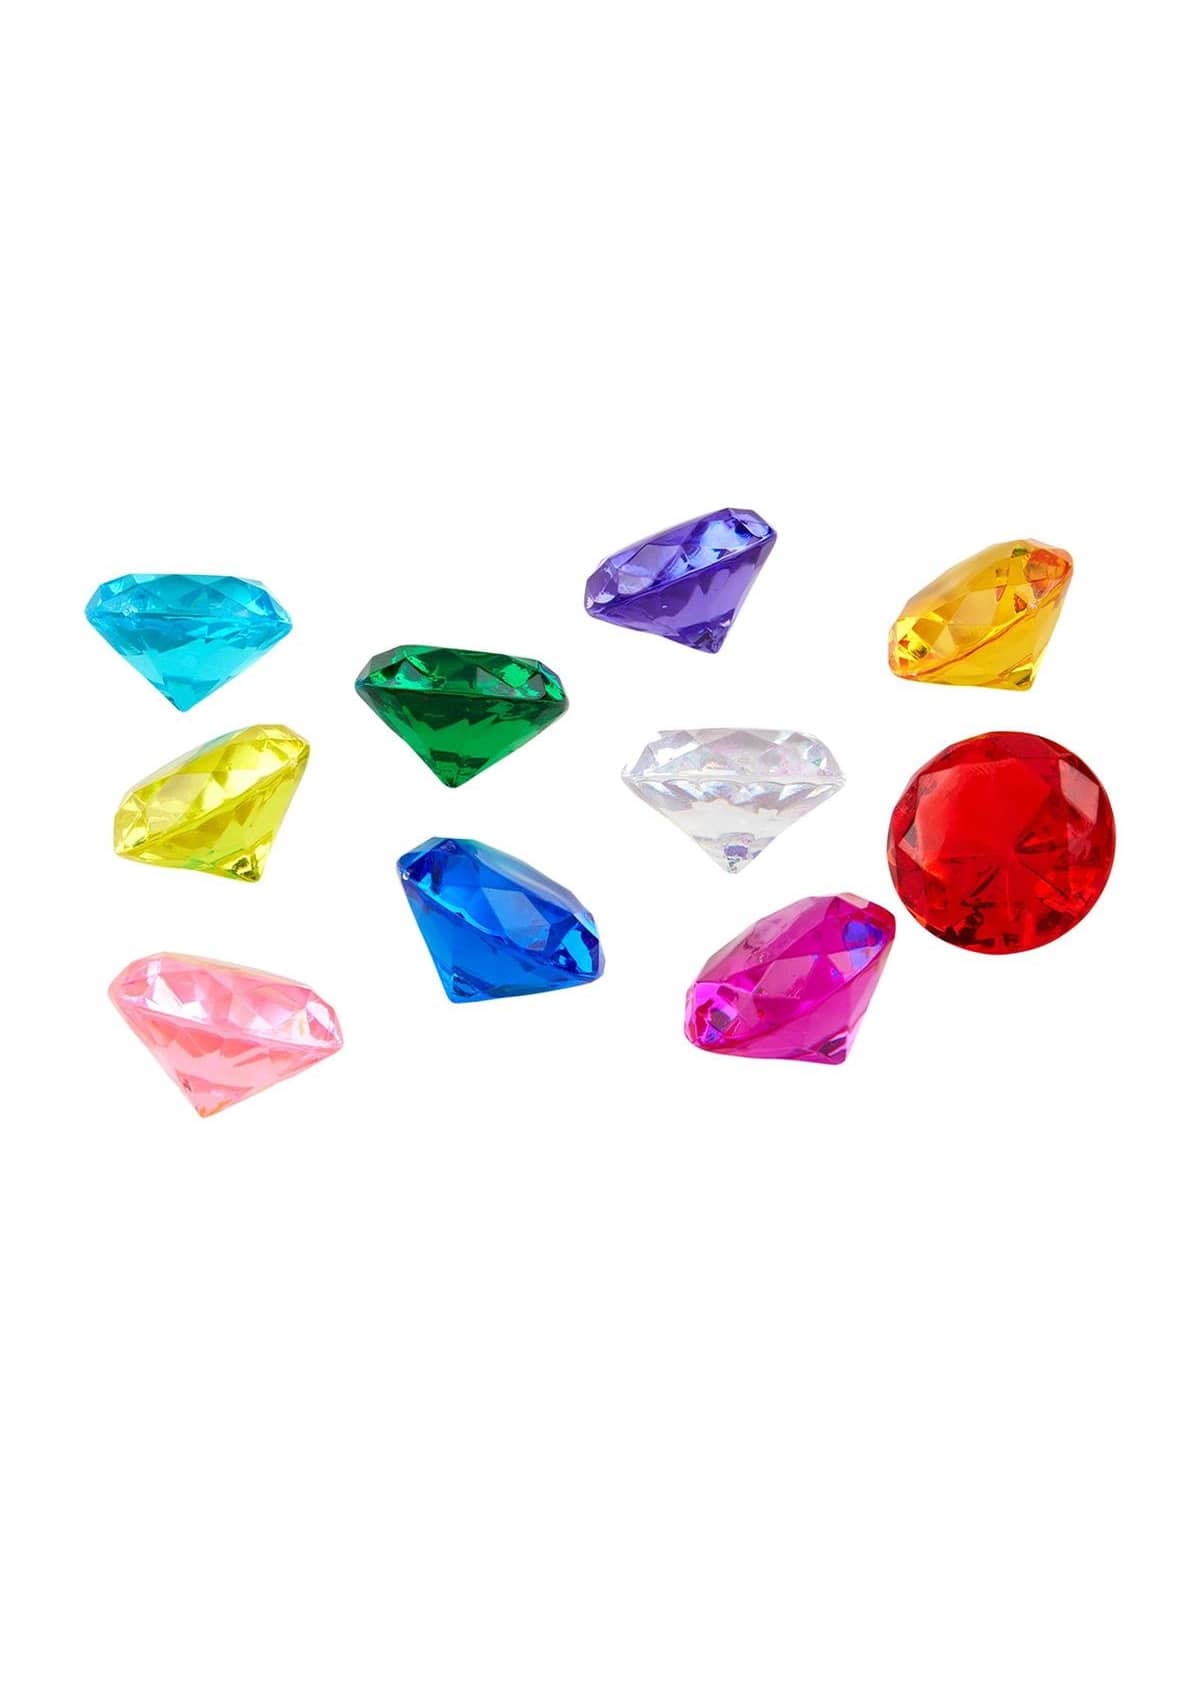 Colorful gems in diamond shapes.